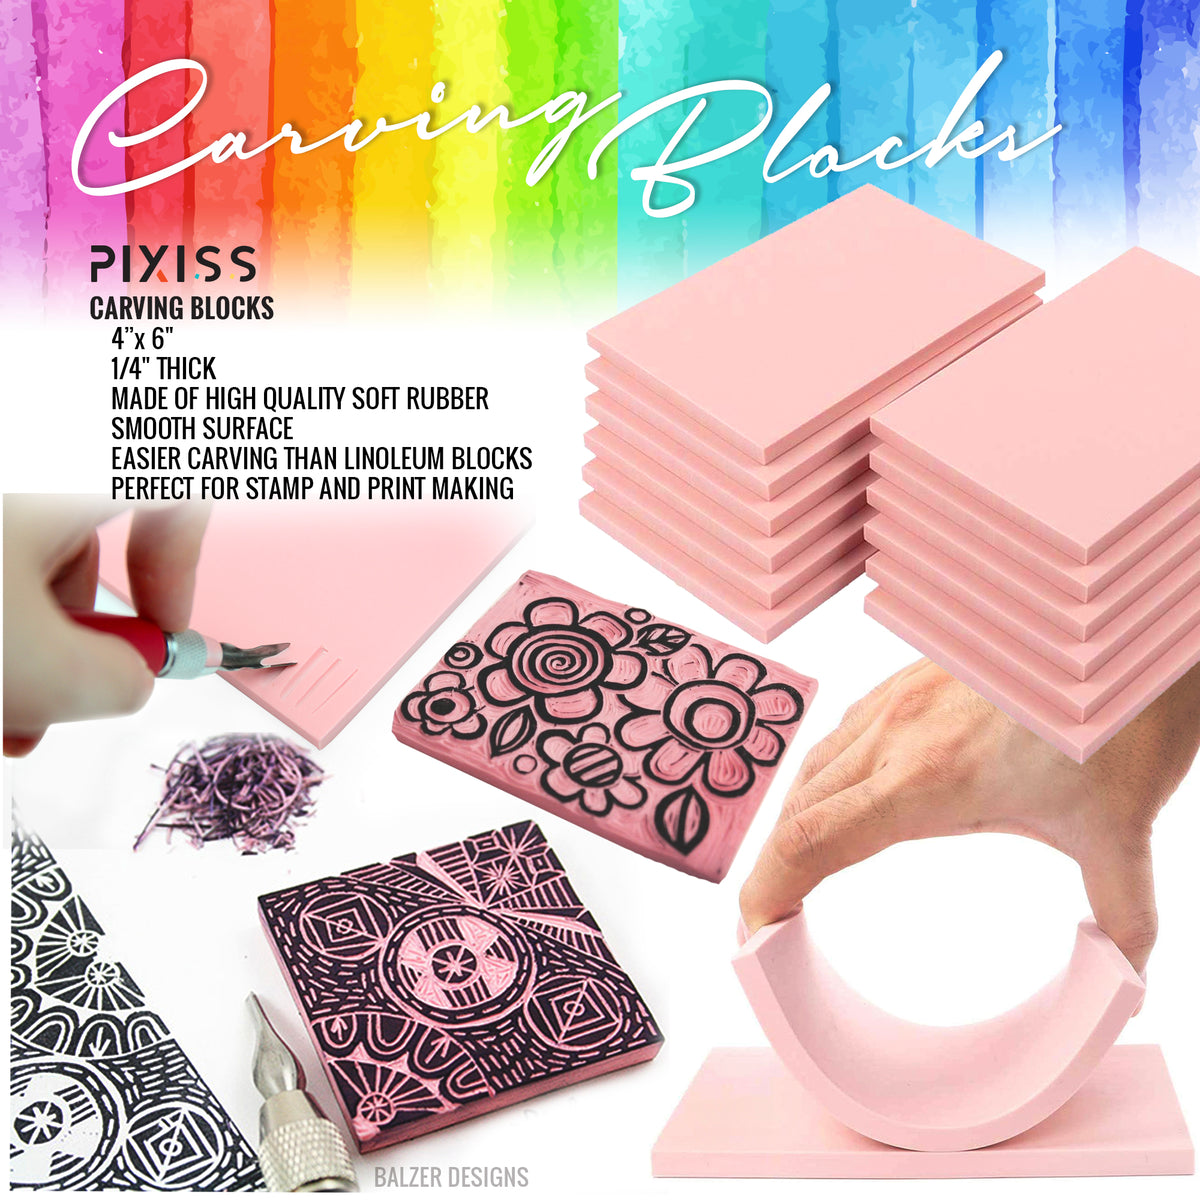 PIXISS Carving Blocks with Lino Cutter - 5 Pack – Pixiss